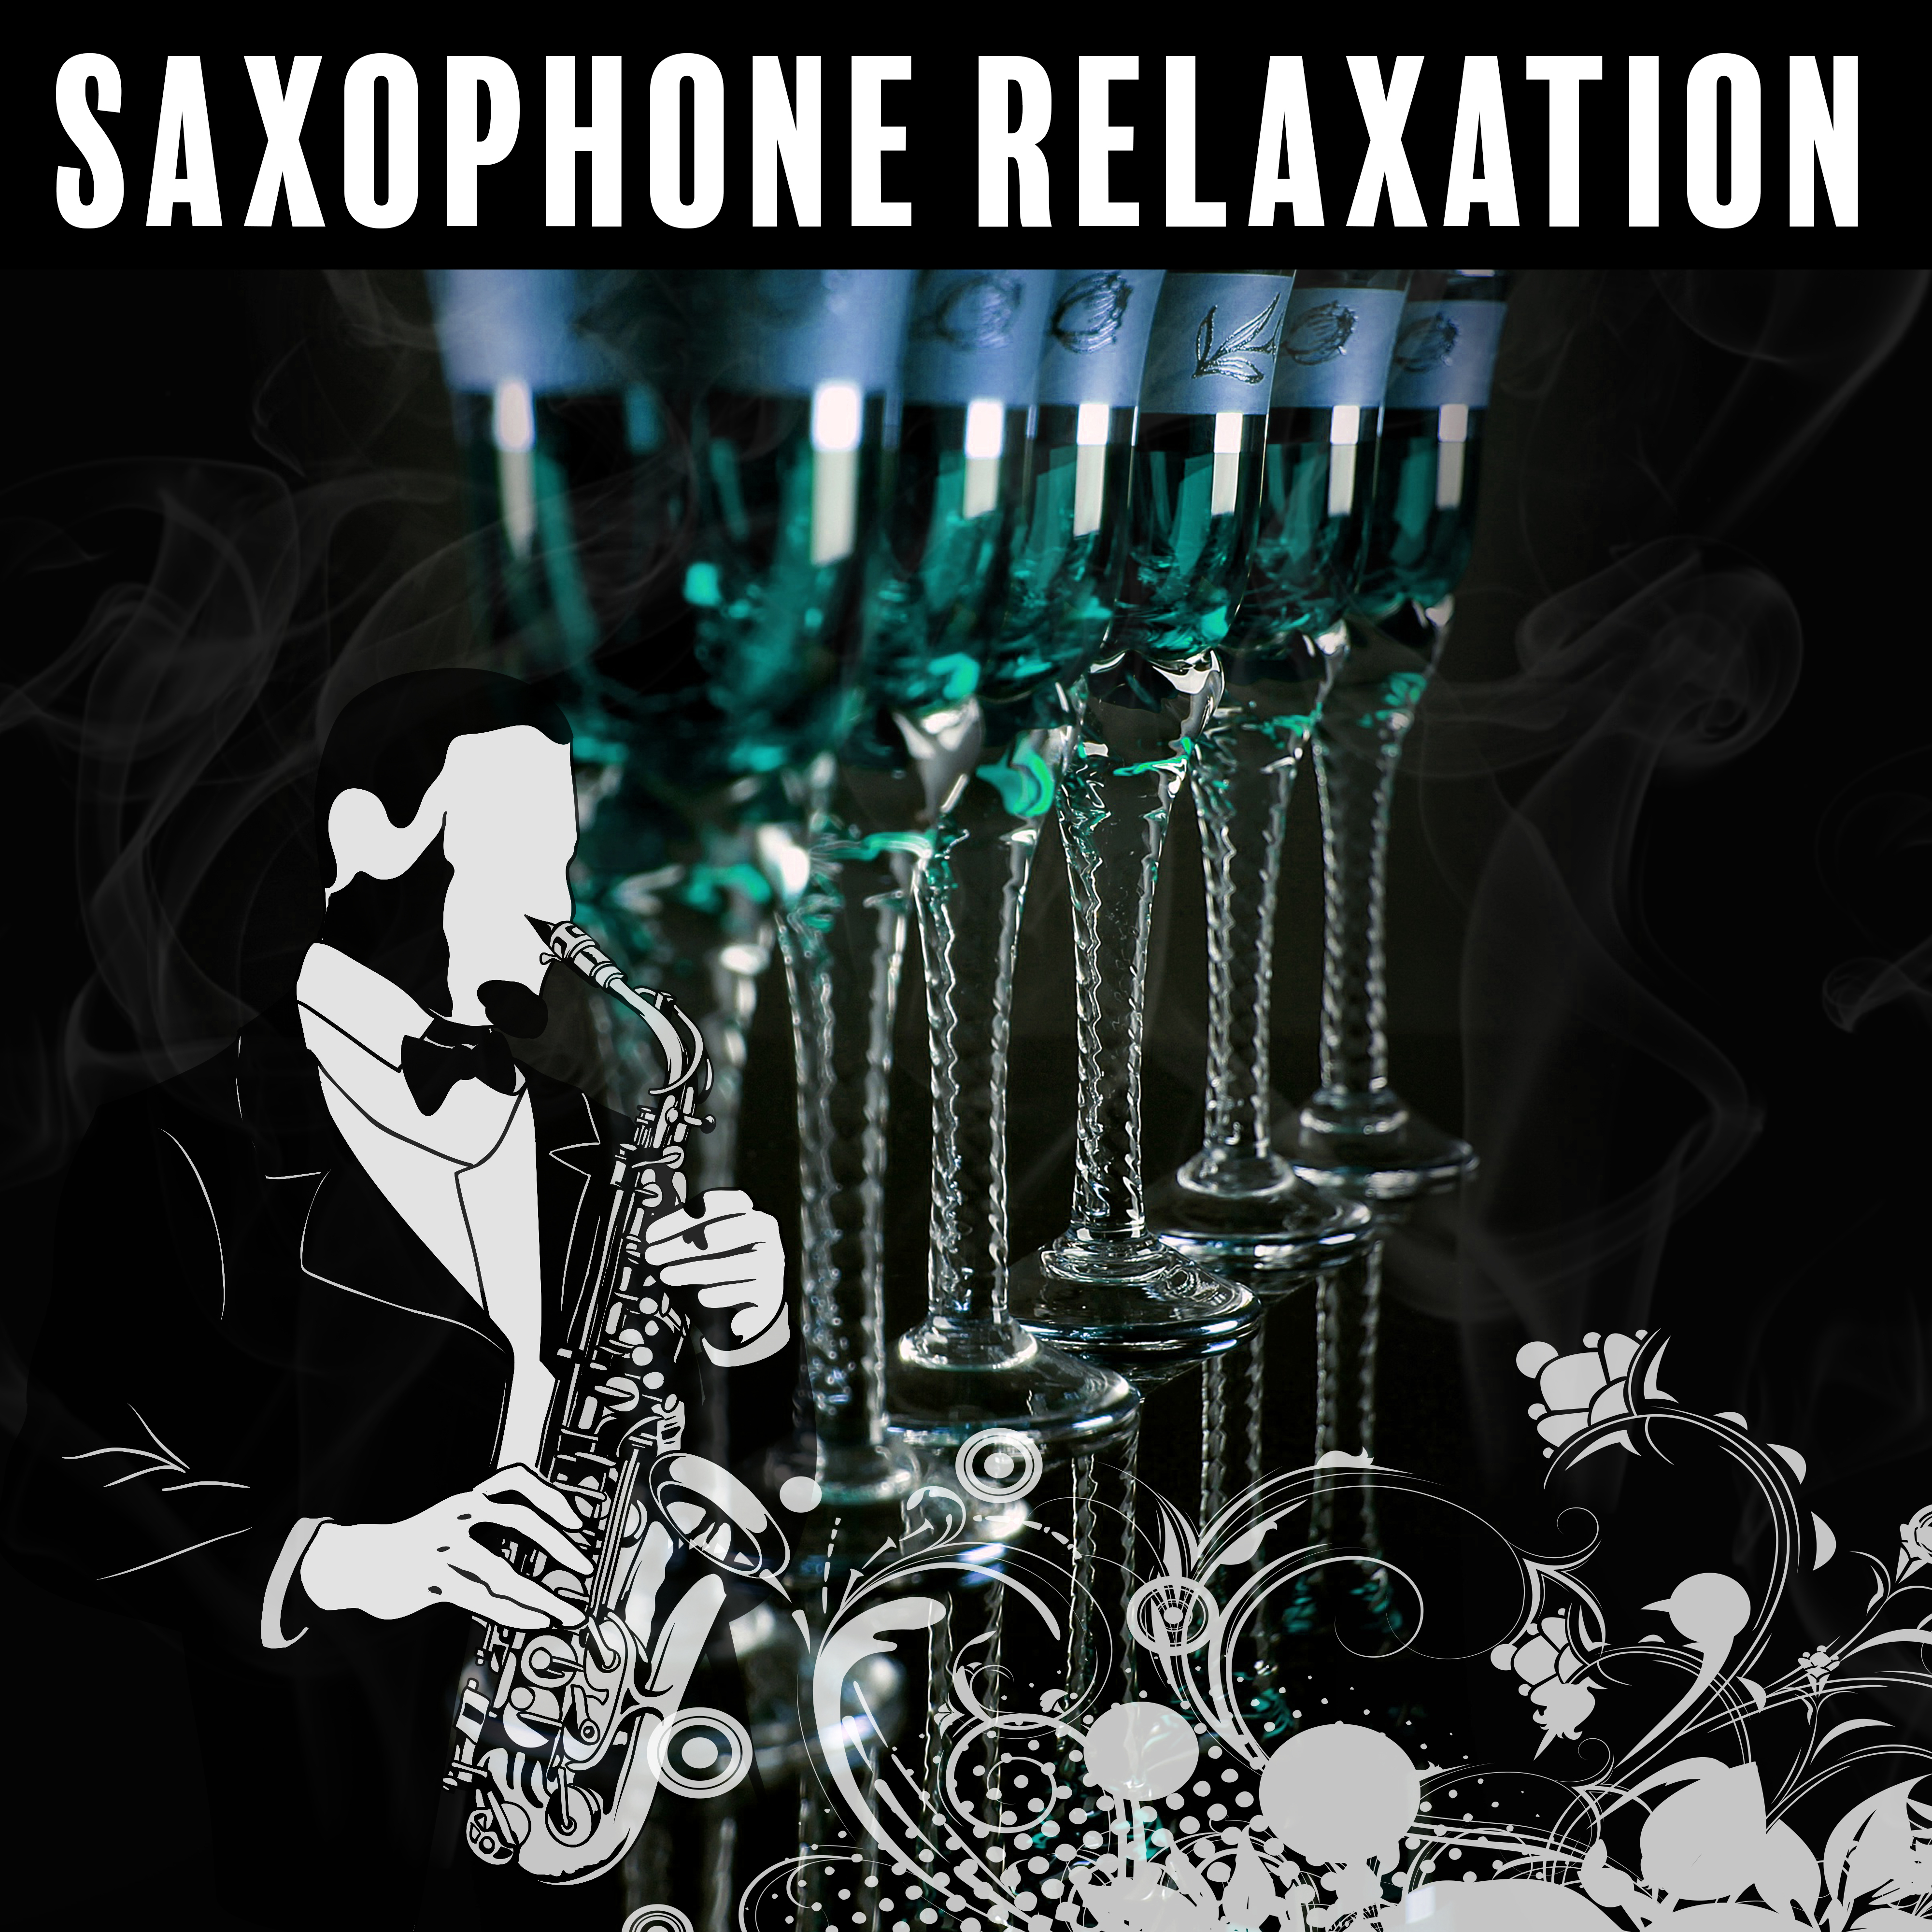 Saxophone Relaxation  Calming Jazz, Saxophone Music, Rest with Beautiful Music, Relaxing Moments